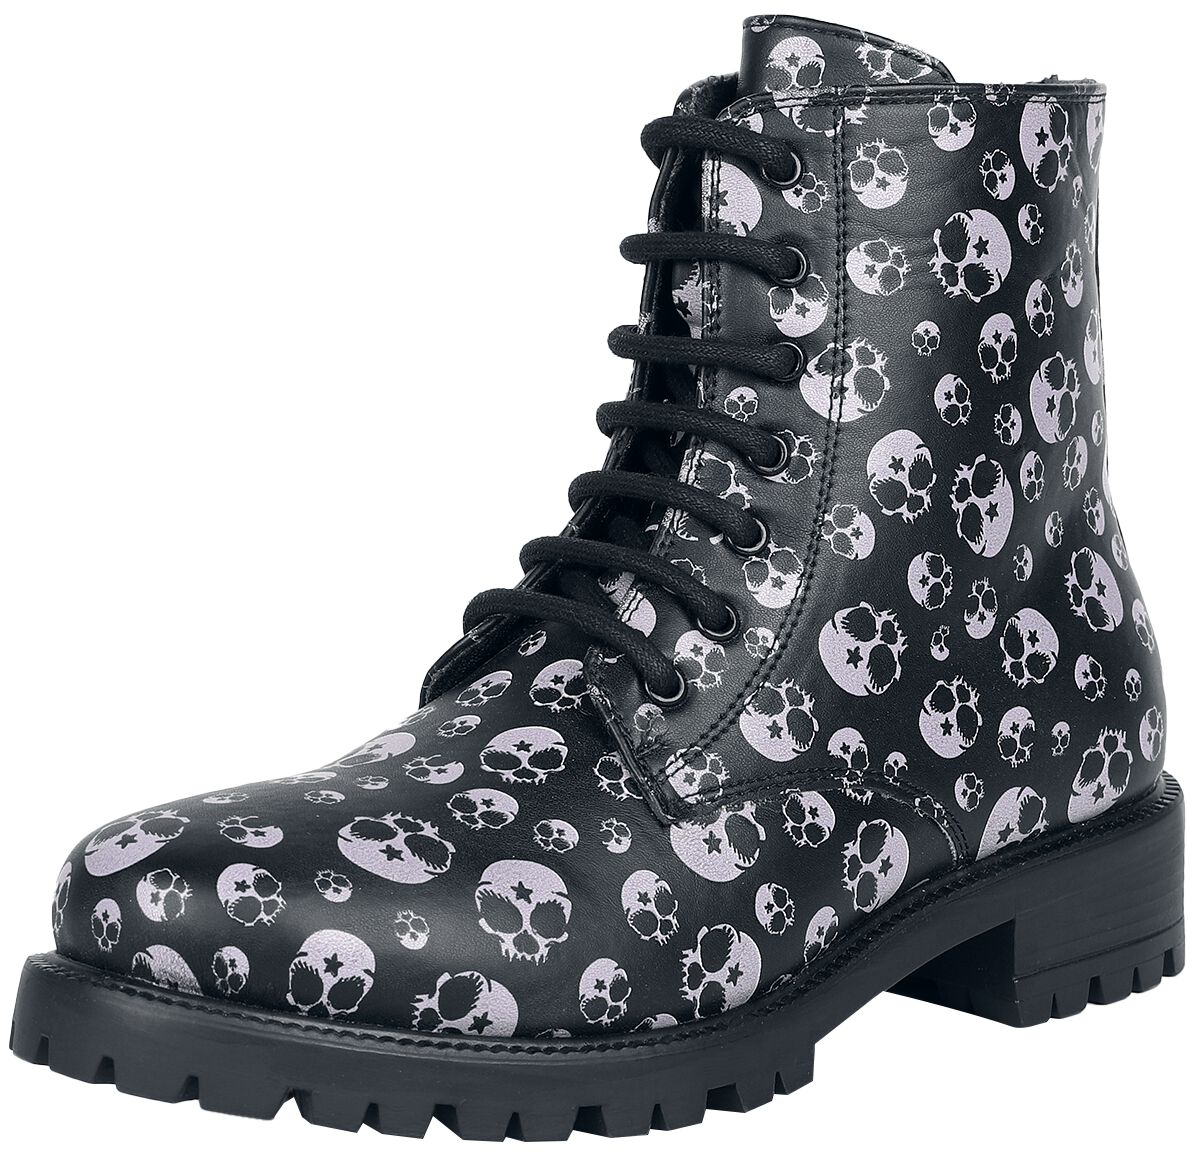 Full Volume by EMP Boots with Skull Alloverprint Boot schwarz in EU38